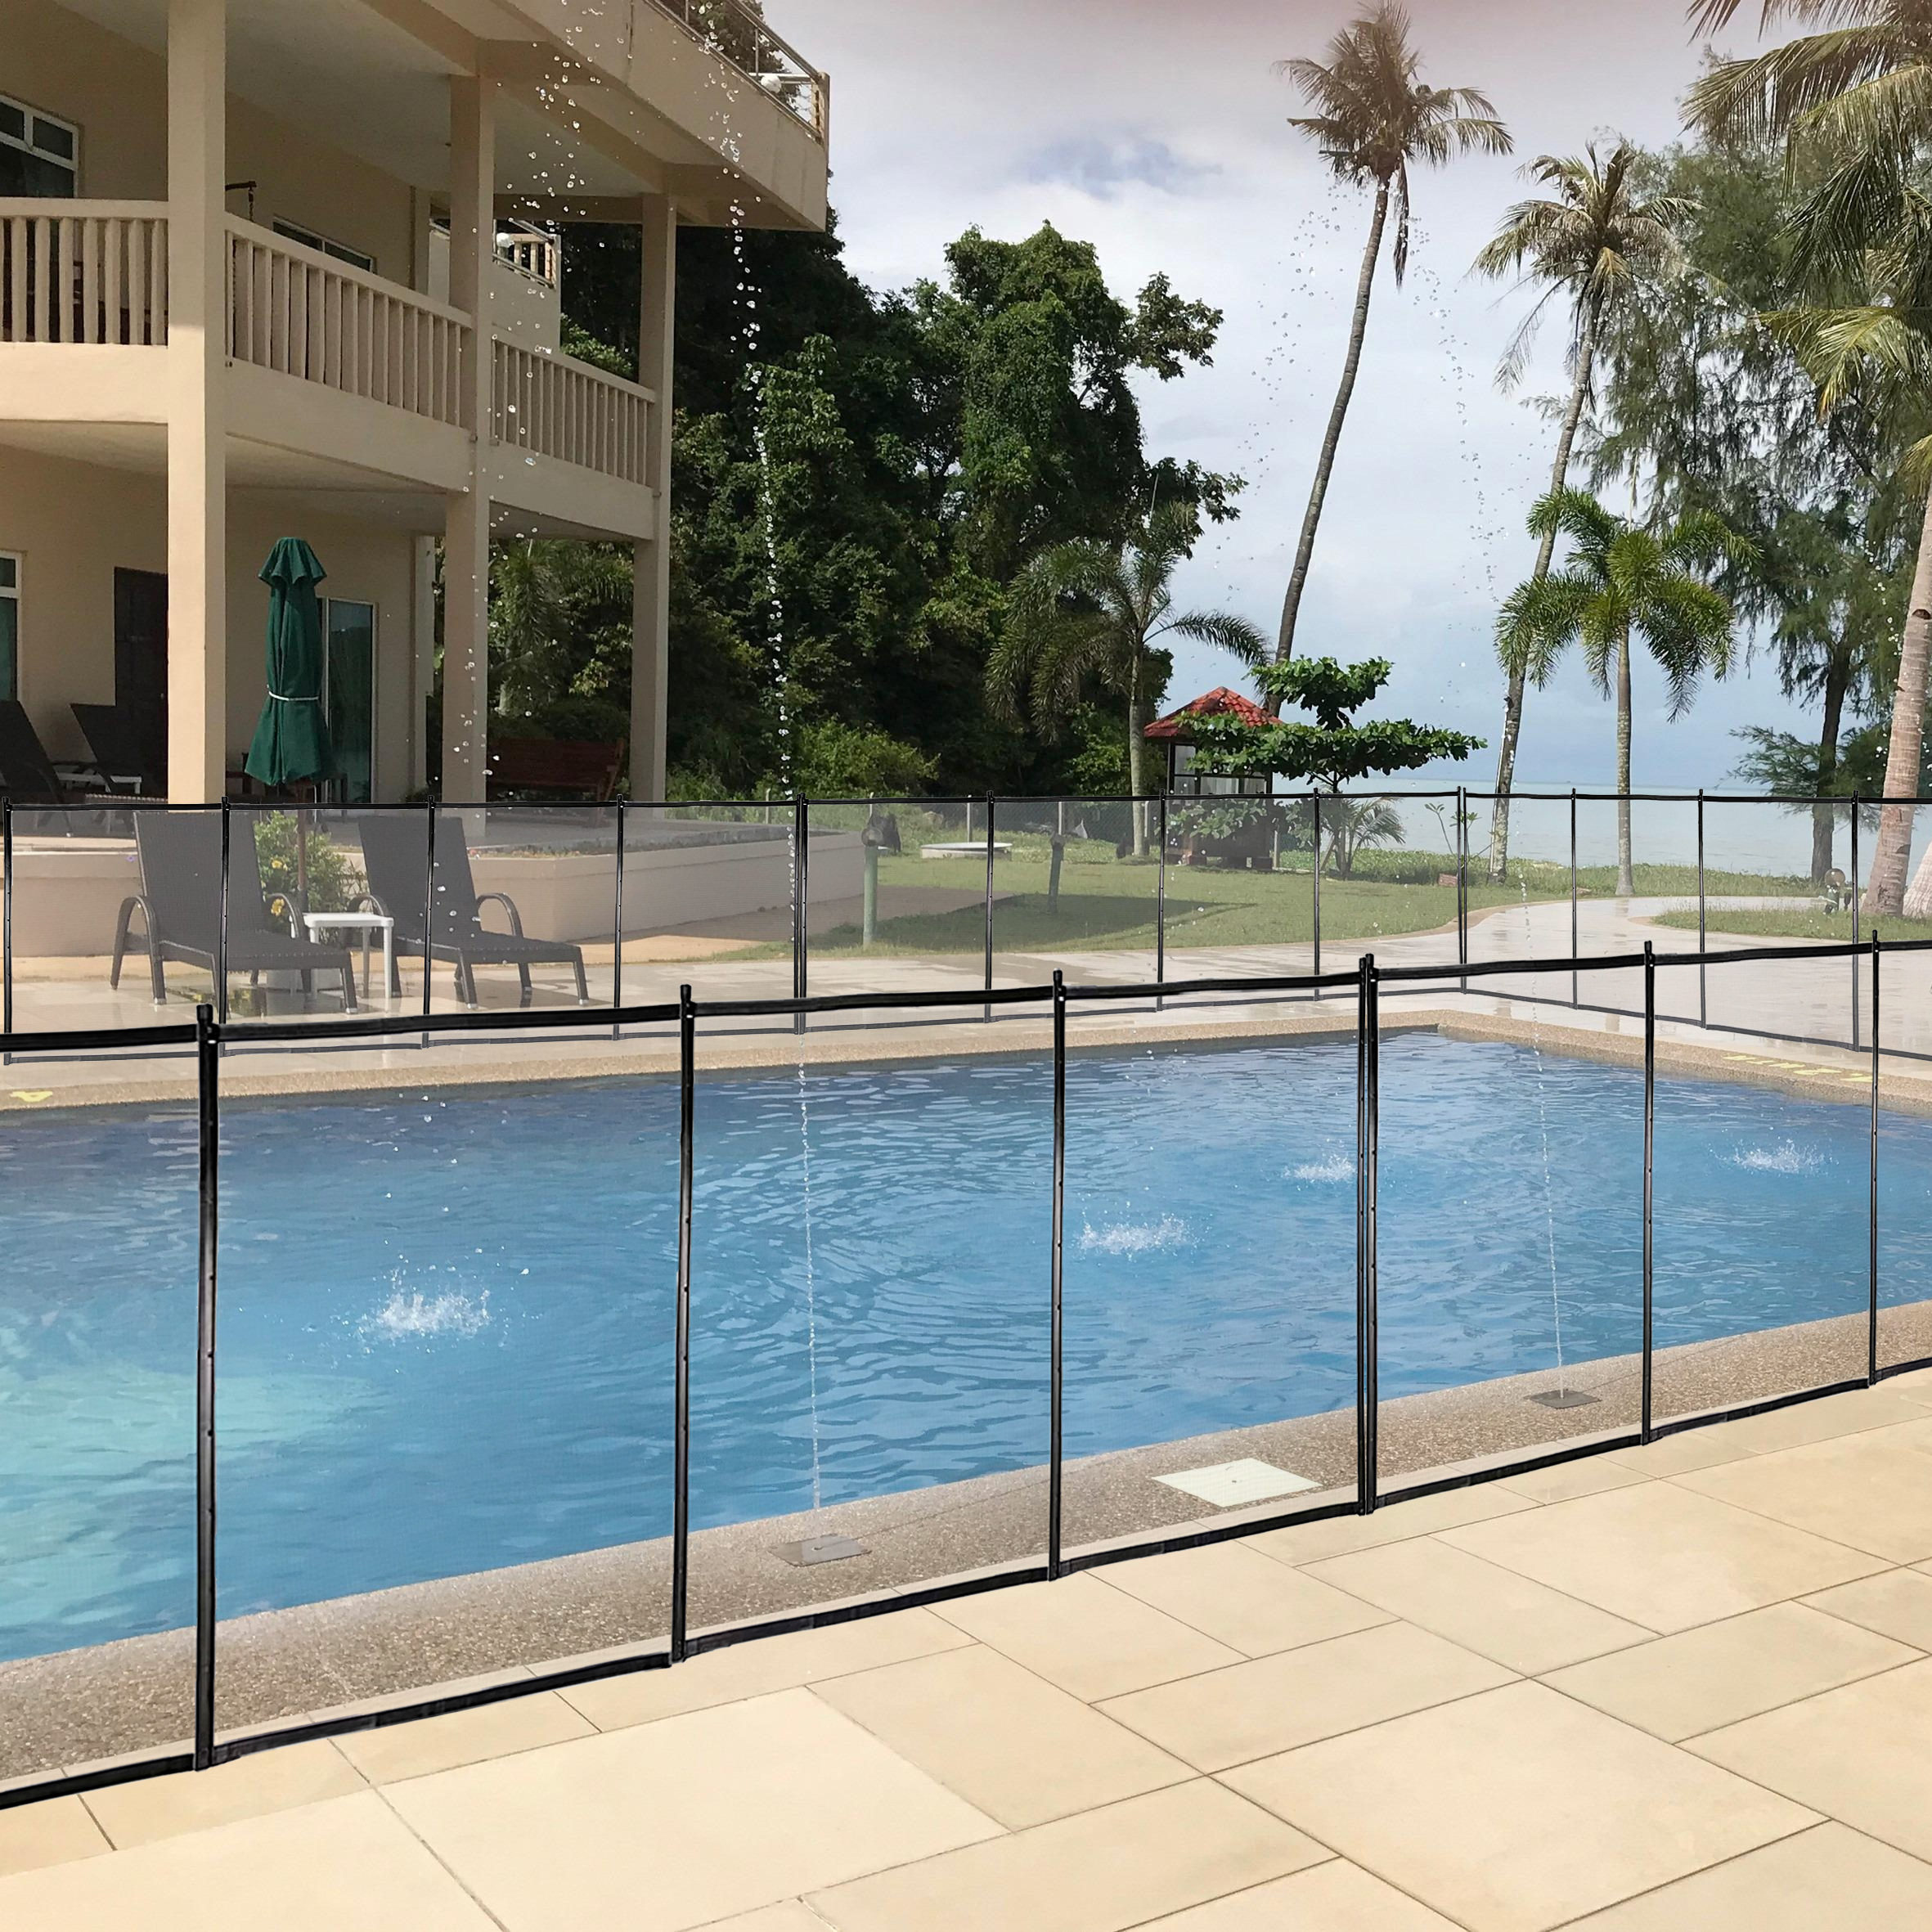 48x4 Ft Outdoor Pool Fence With Section Kit,Removable Mesh Barrier,For Inground Pools,Garden And Patio,Black-Boyel Living